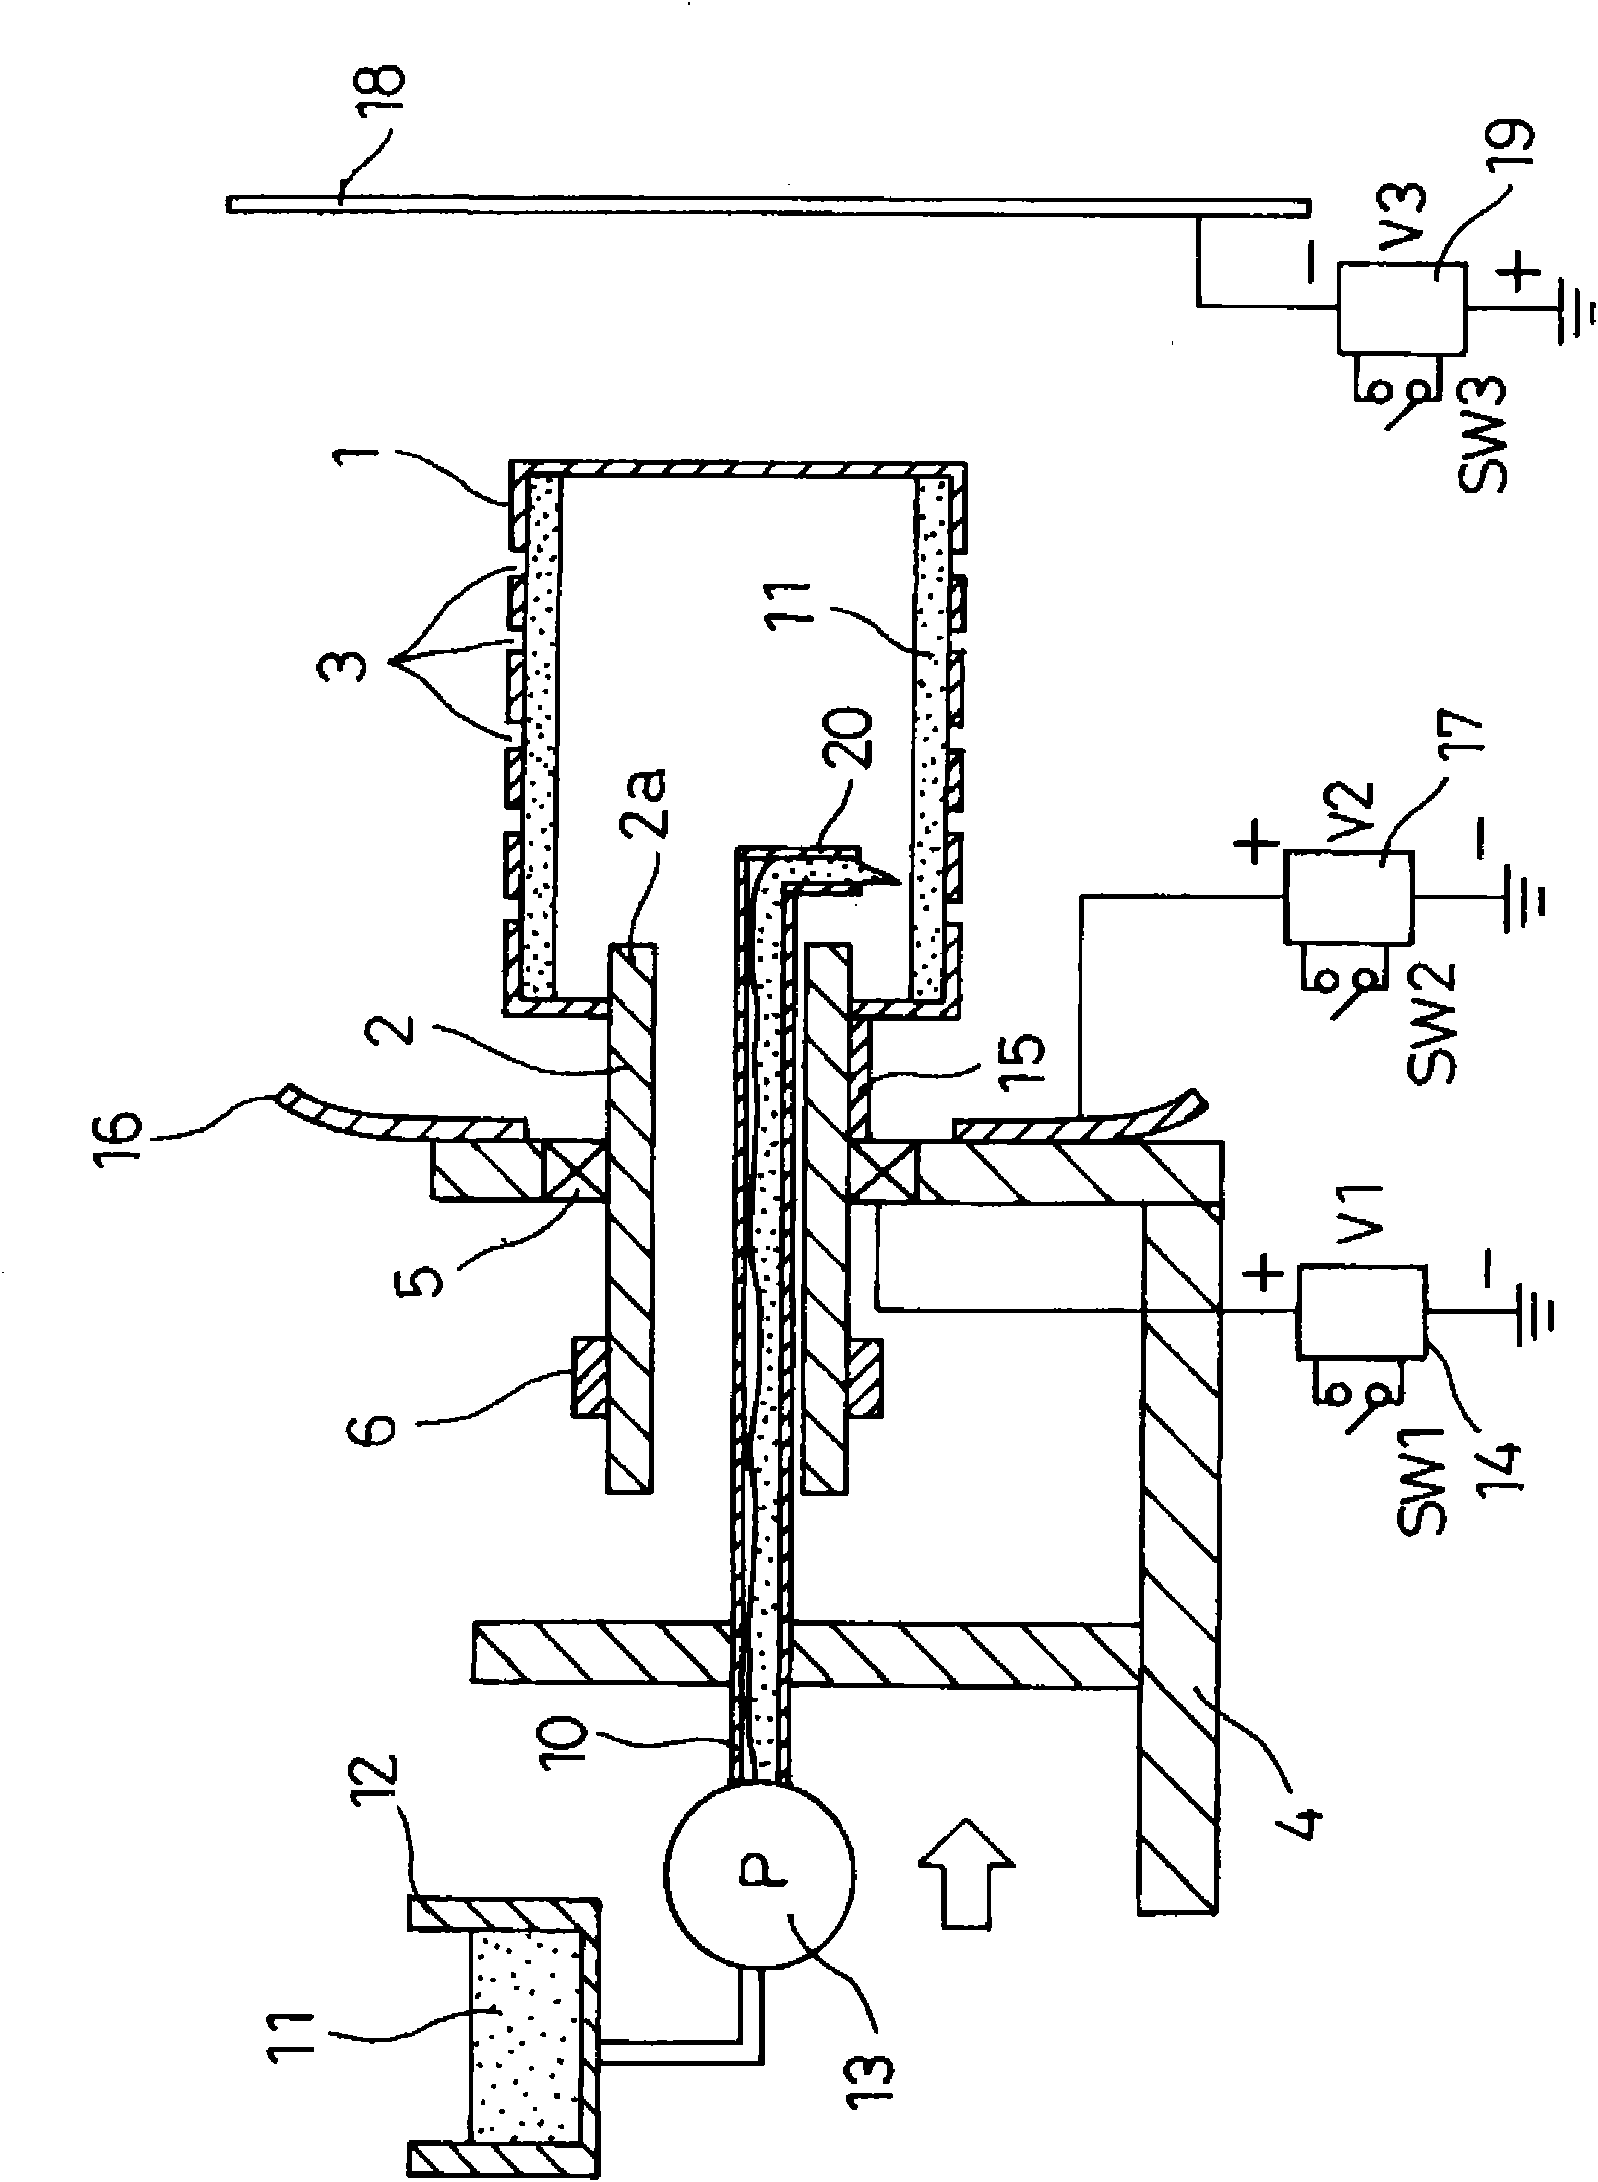 Process and apparatus for producing nanofiber and polymer web